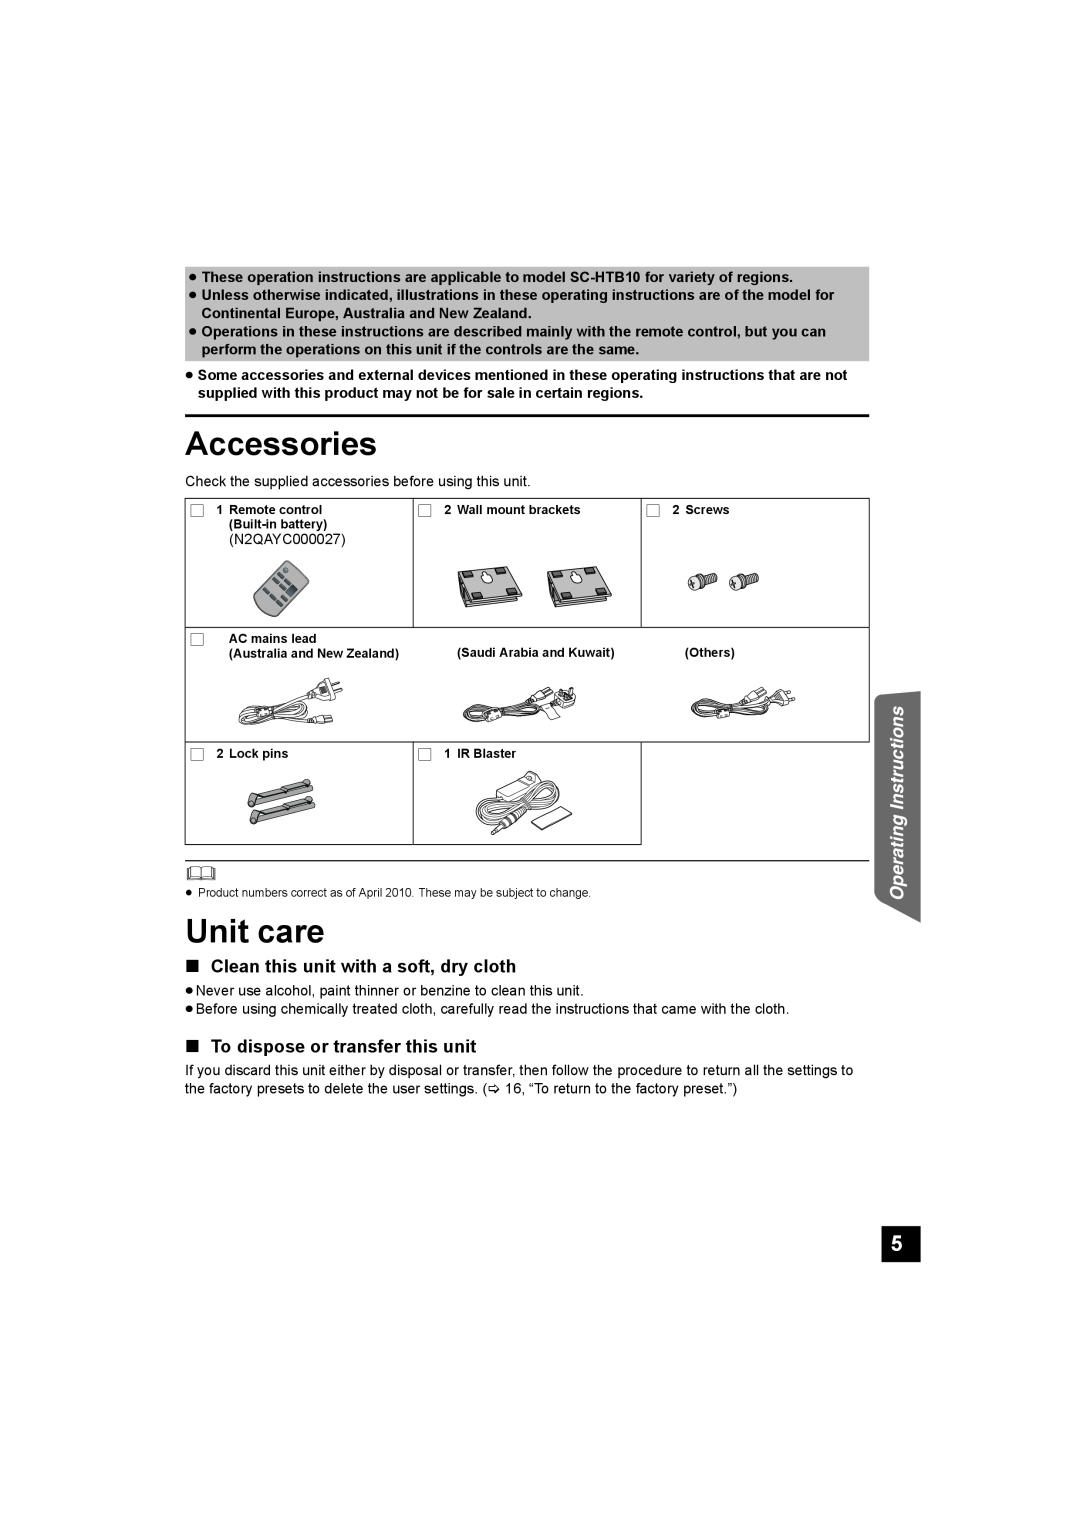 Panasonic SC-HTB10 Accessories, Unit care, Clean this unit with a soft, dry cloth, To dispose or transfer this unit 